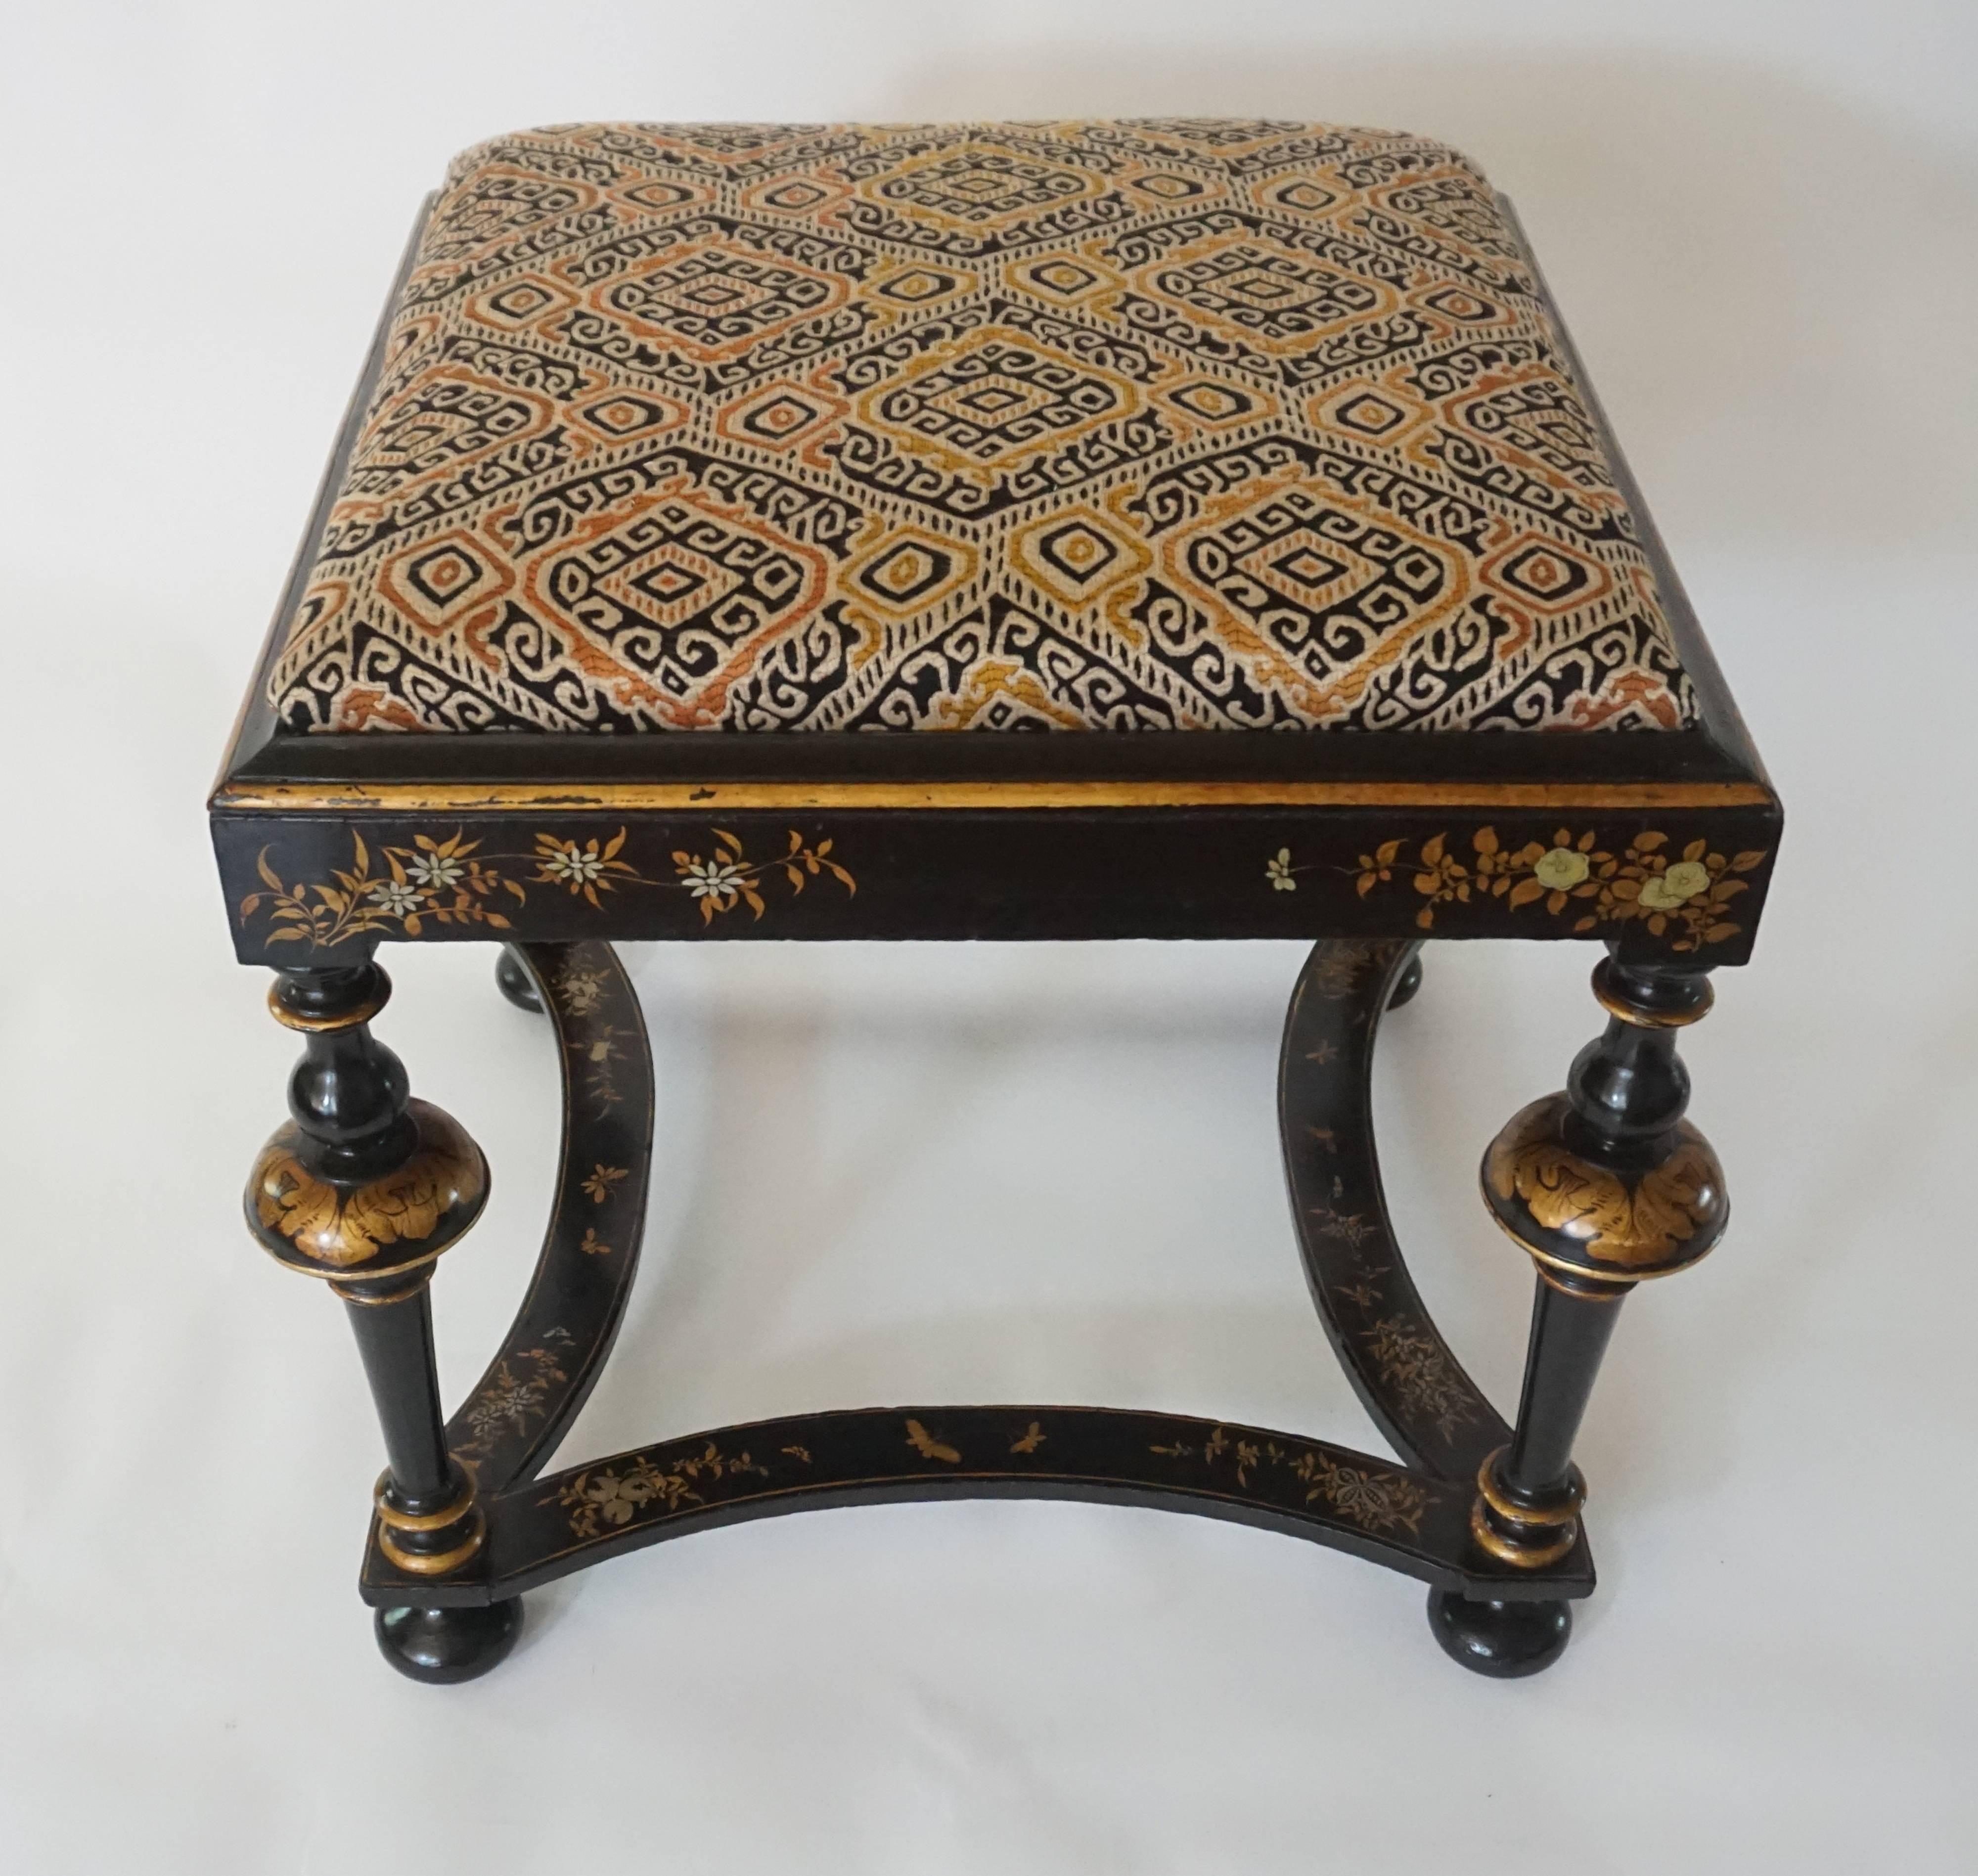 William and Mary chinoiserie style black lacquer low stool or tabouret having gold and silver gilt japanned foliate and insect decoration on wood frame having square upholstered seat surmounting flat seat-rails on dramatic turned supports joining